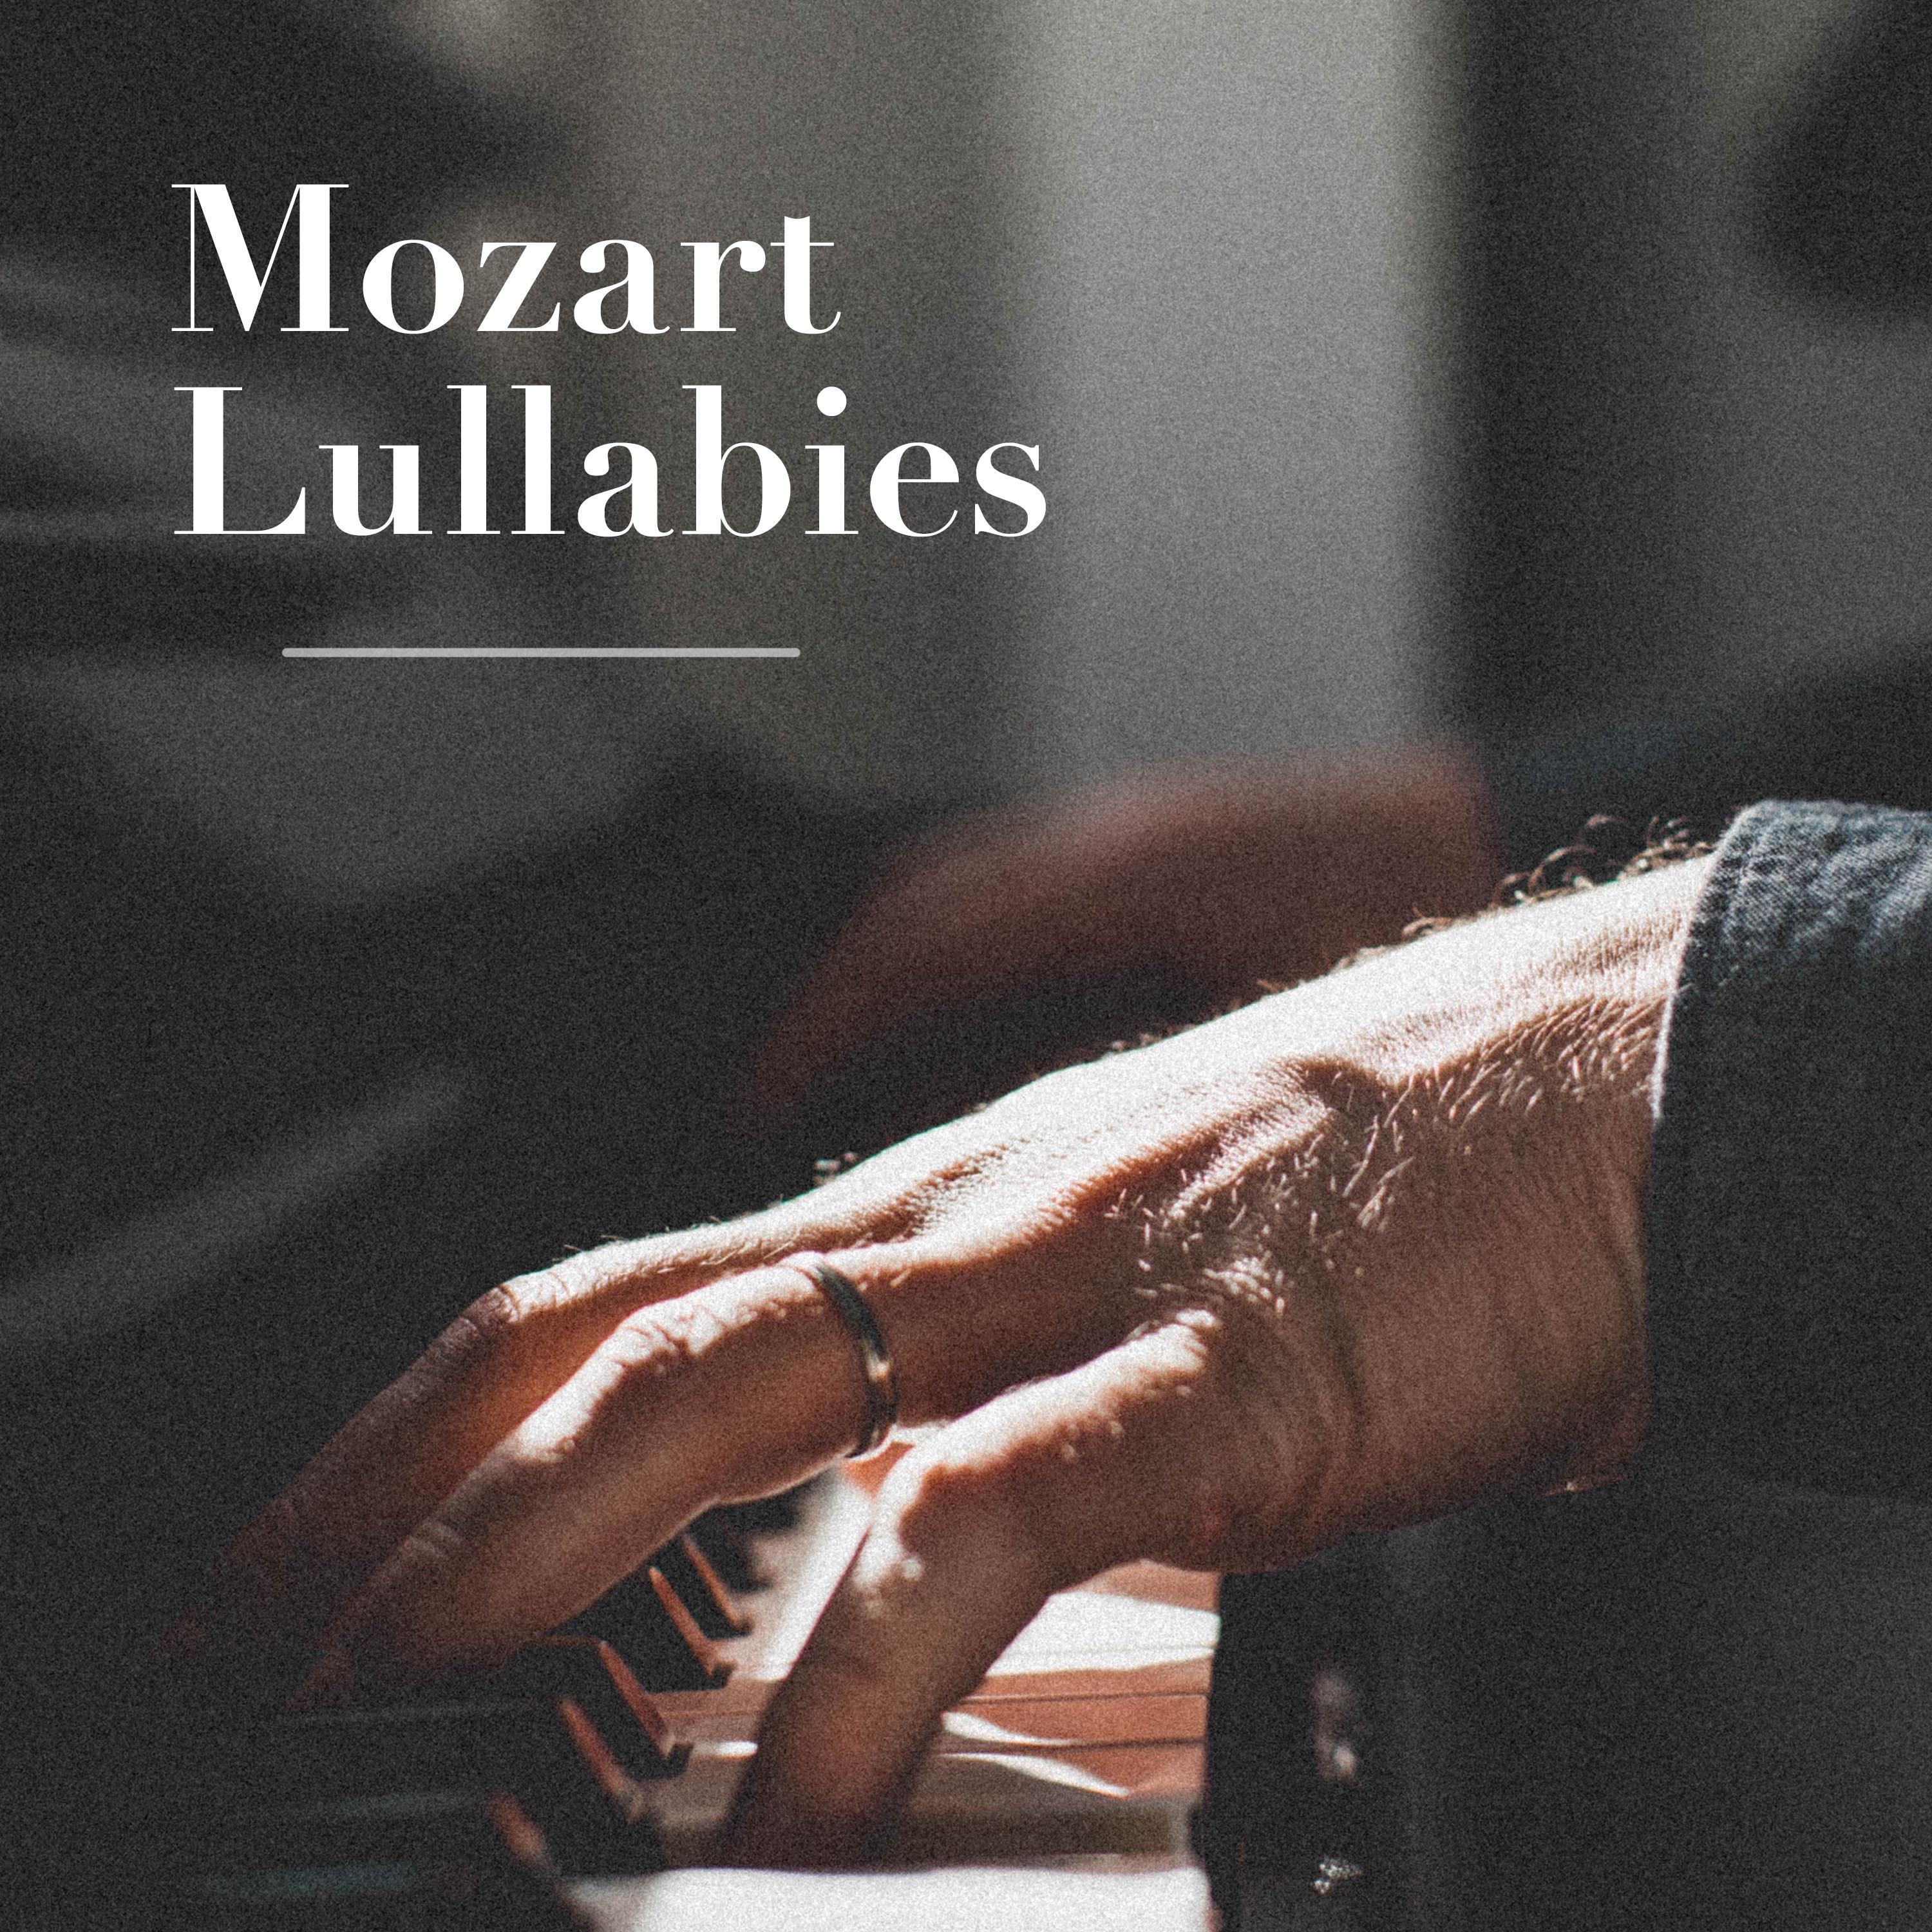 Mozart Lullabies - Relaxing Sleep Music with Classical Music and Piano Music